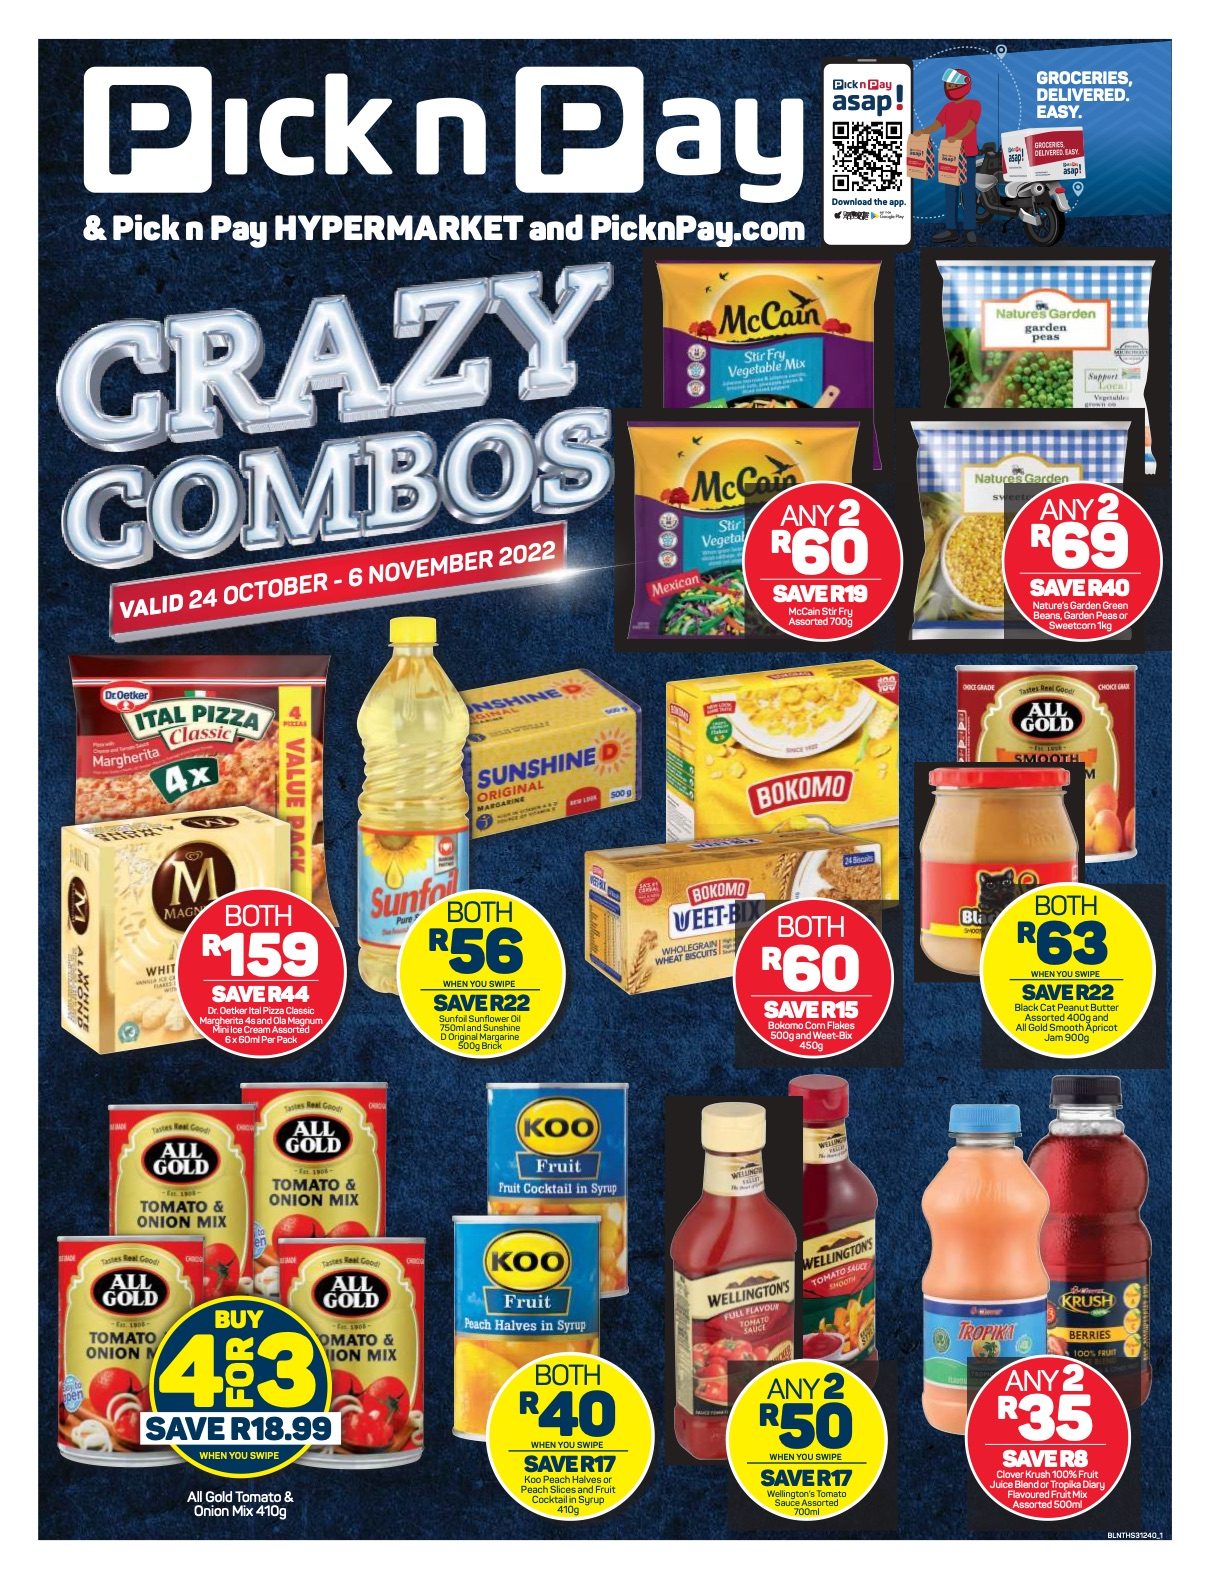 Pick n Pay Specials Crazy Combo Oct 2022